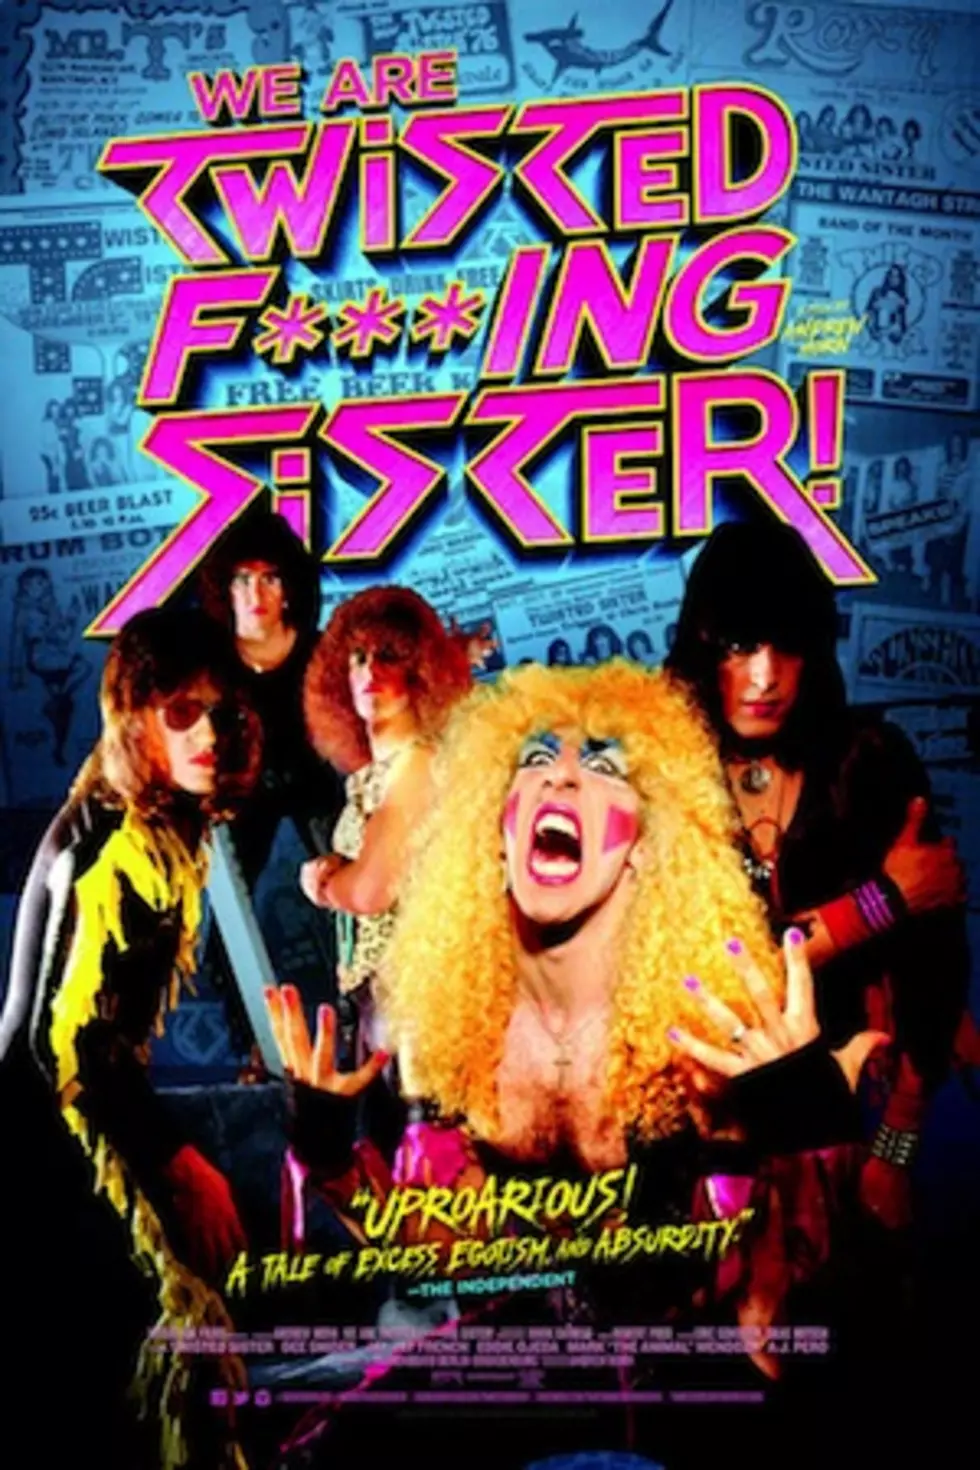 &#8216;We Are Twisted F***ing Sister!&#8217; &#8211; Film Review